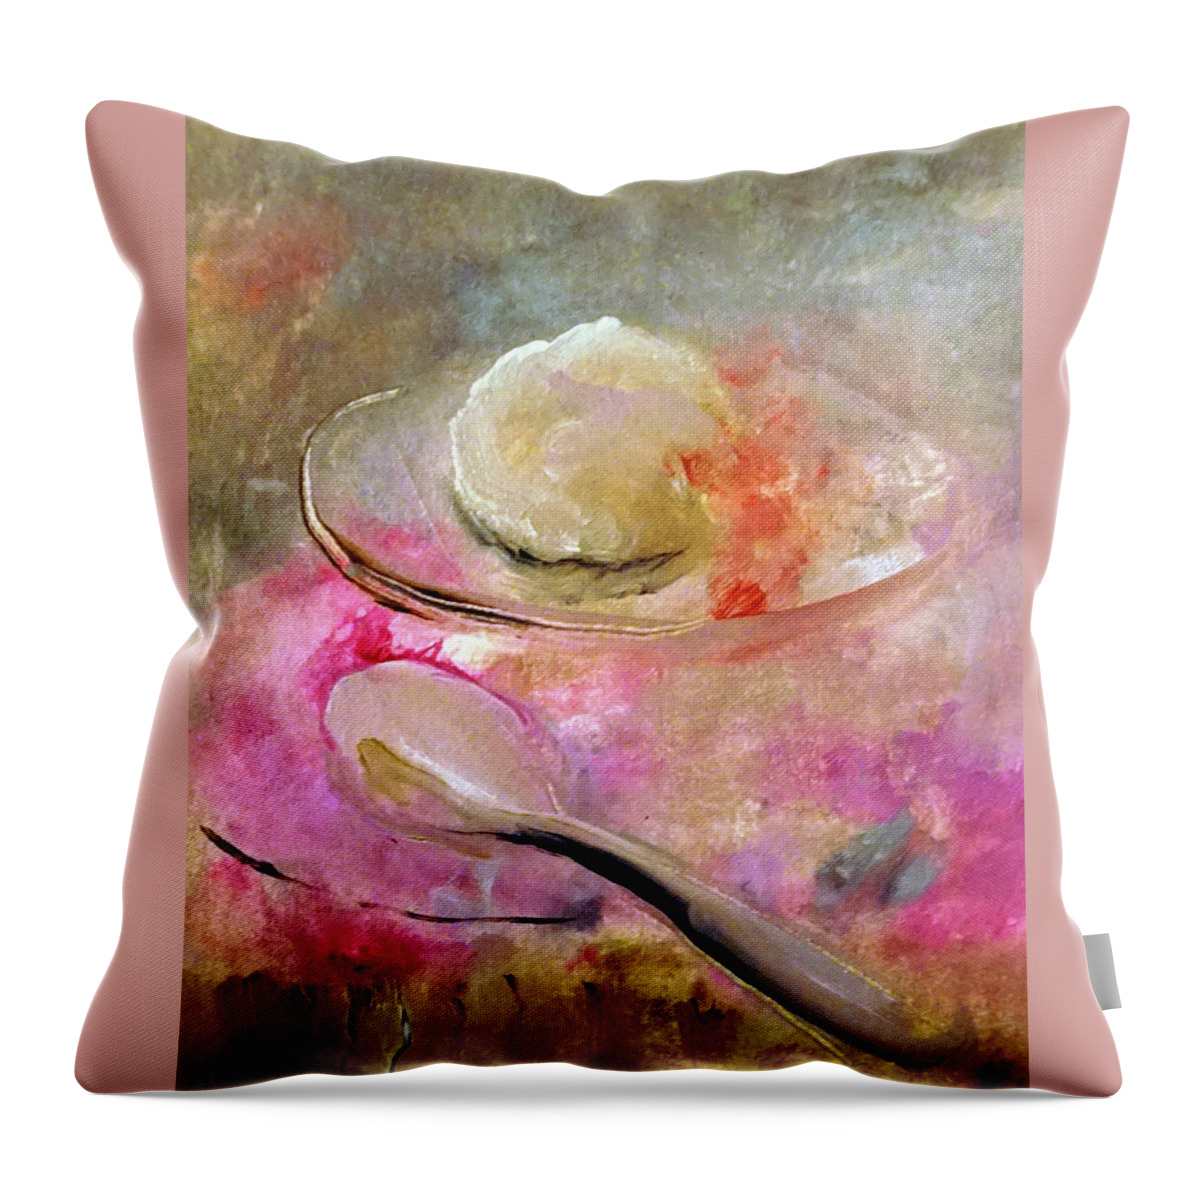 Creamy Throw Pillow featuring the digital art Yummy Pink Deliciousness Painting by Lisa Kaiser